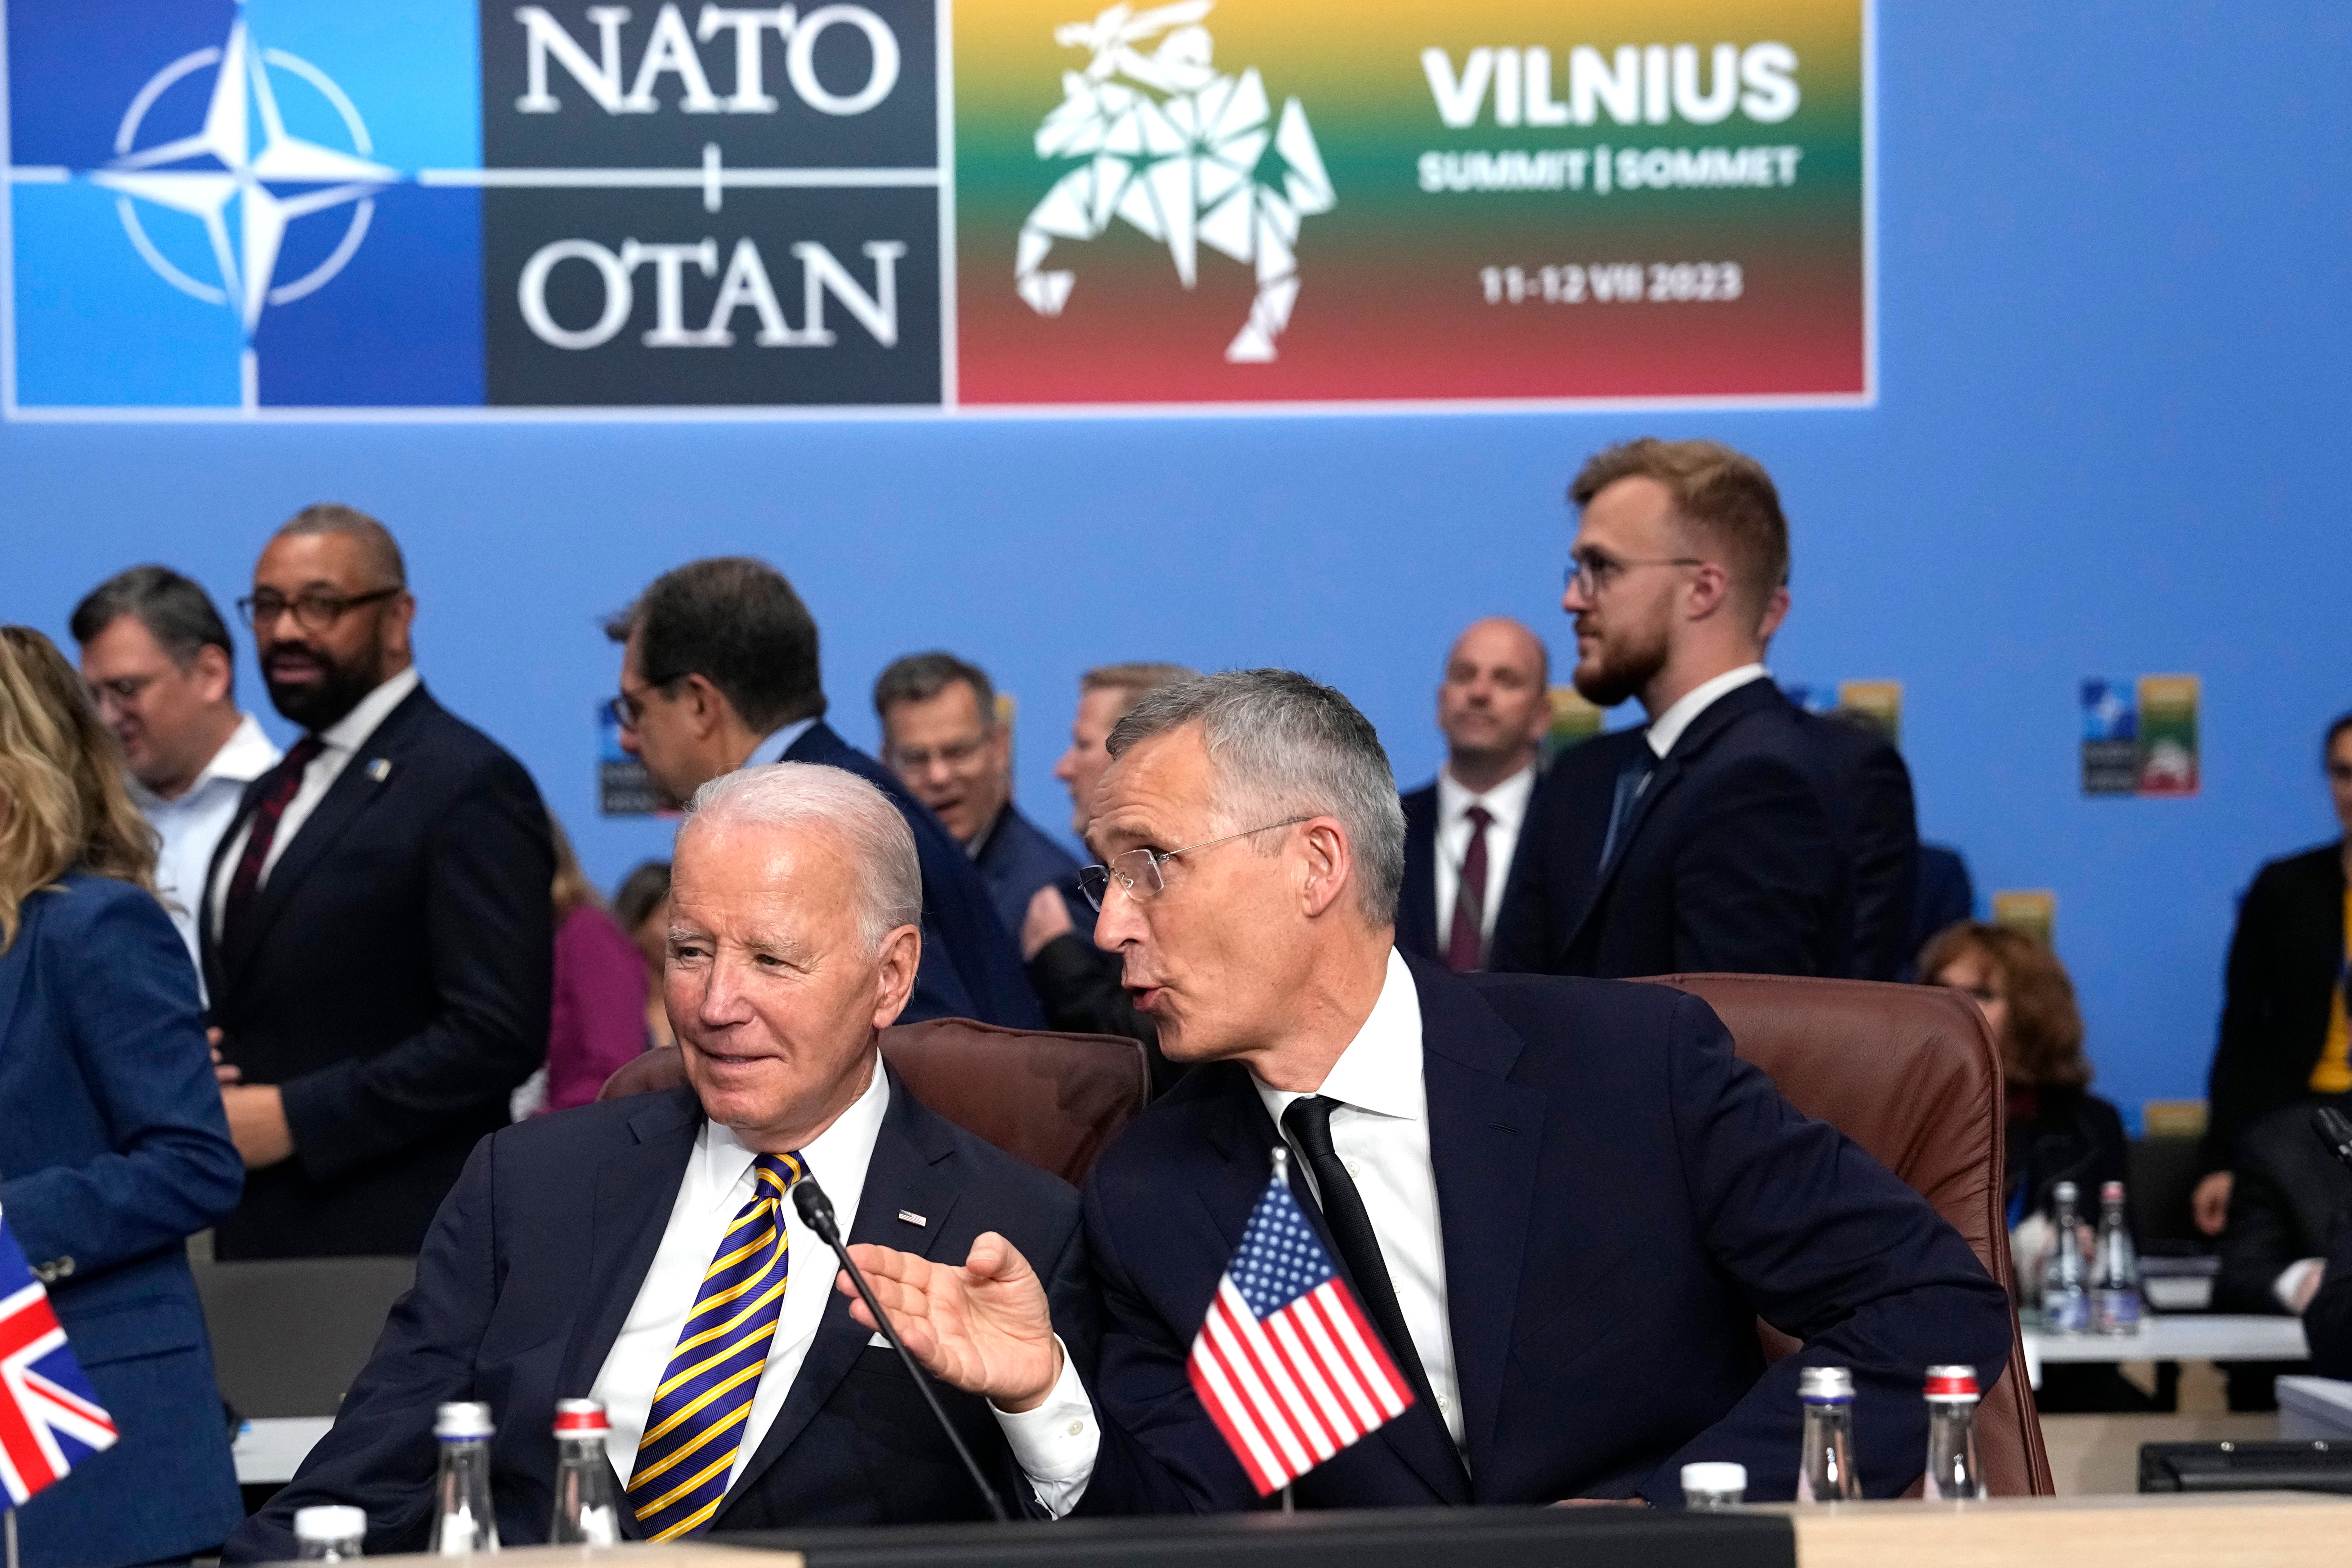 NATO Secretary General Jens Stoltenberg, right, speaks with United States President Joe Biden during a meeting of the NATO-Ukraine Council during a NATO summit in Vilnius, Lithuania, July 12, 2023